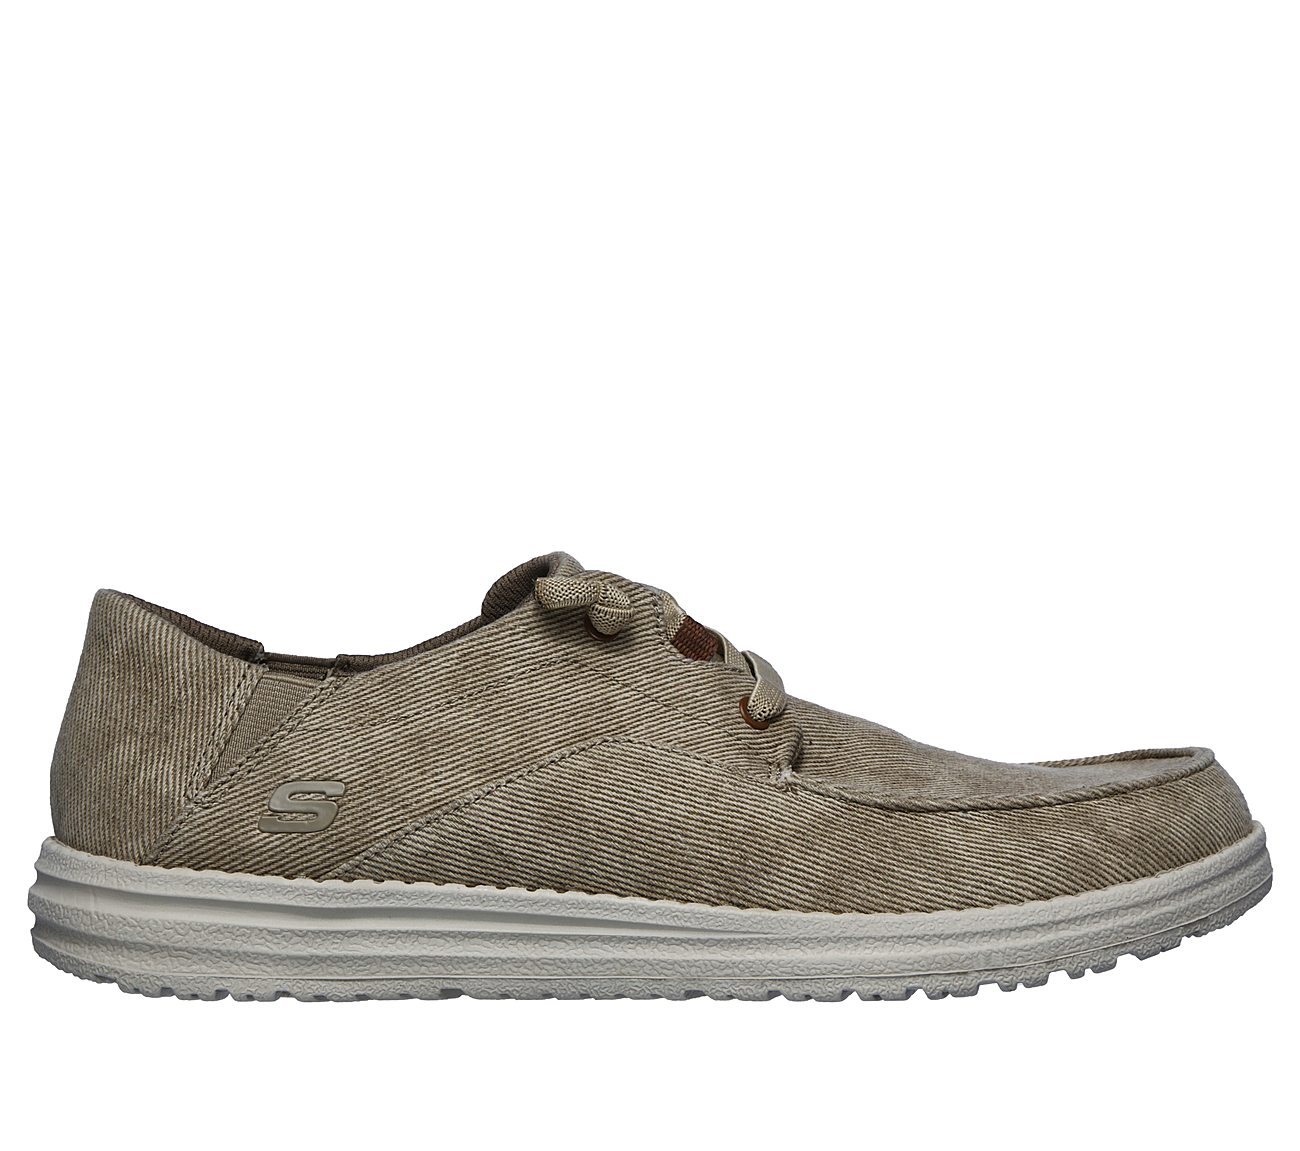 Buy SKECHERS Melson - Volgo USA Casuals Shoes only $65.00